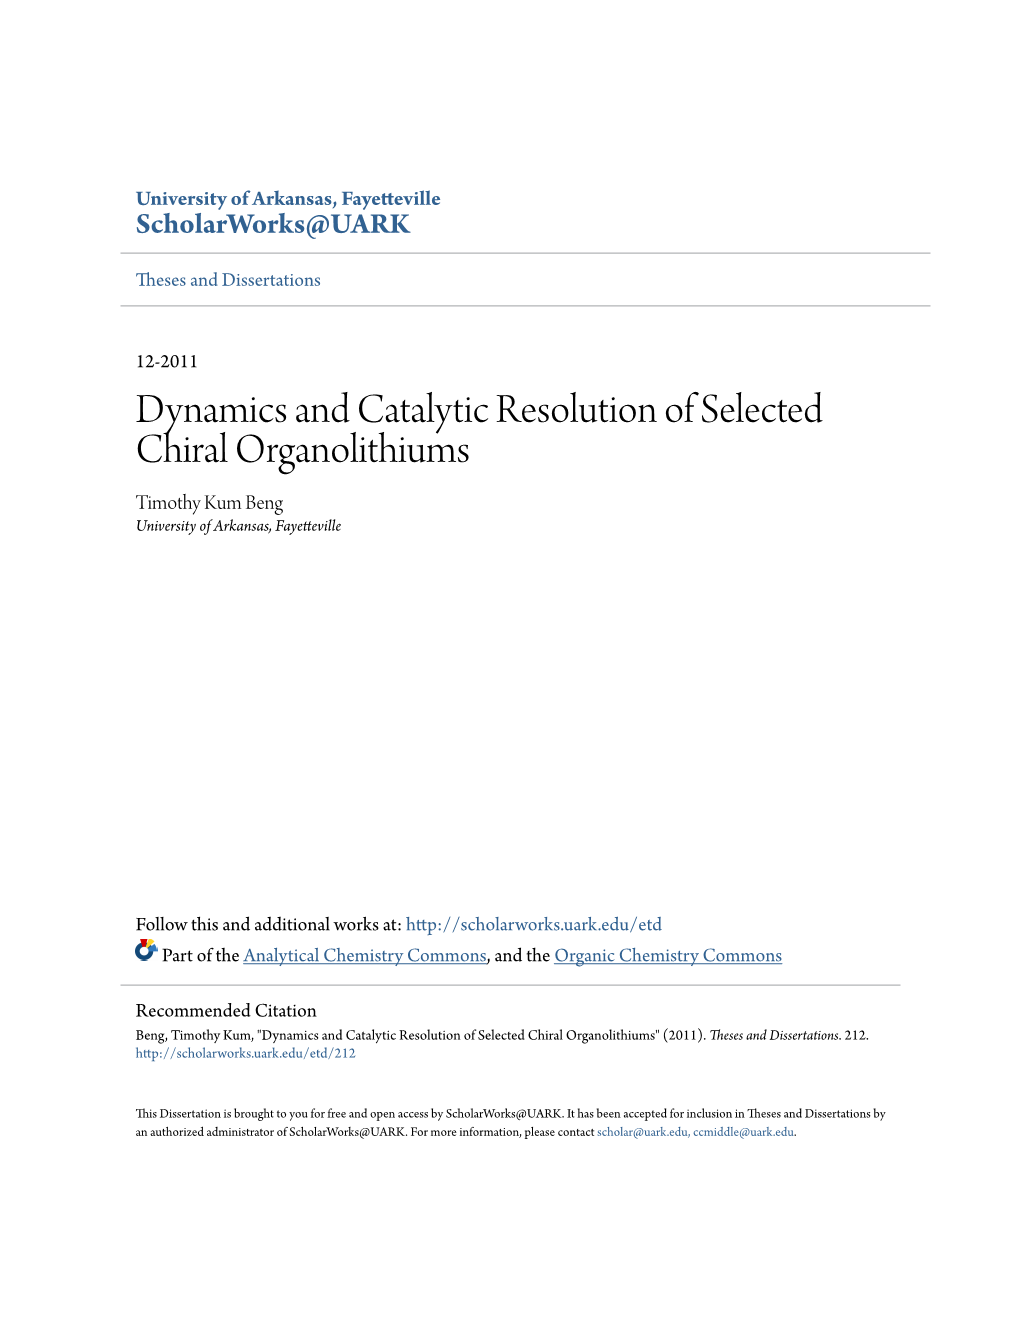 Dynamics and Catalytic Resolution of Selected Chiral Organolithiums Timothy Kum Beng University of Arkansas, Fayetteville